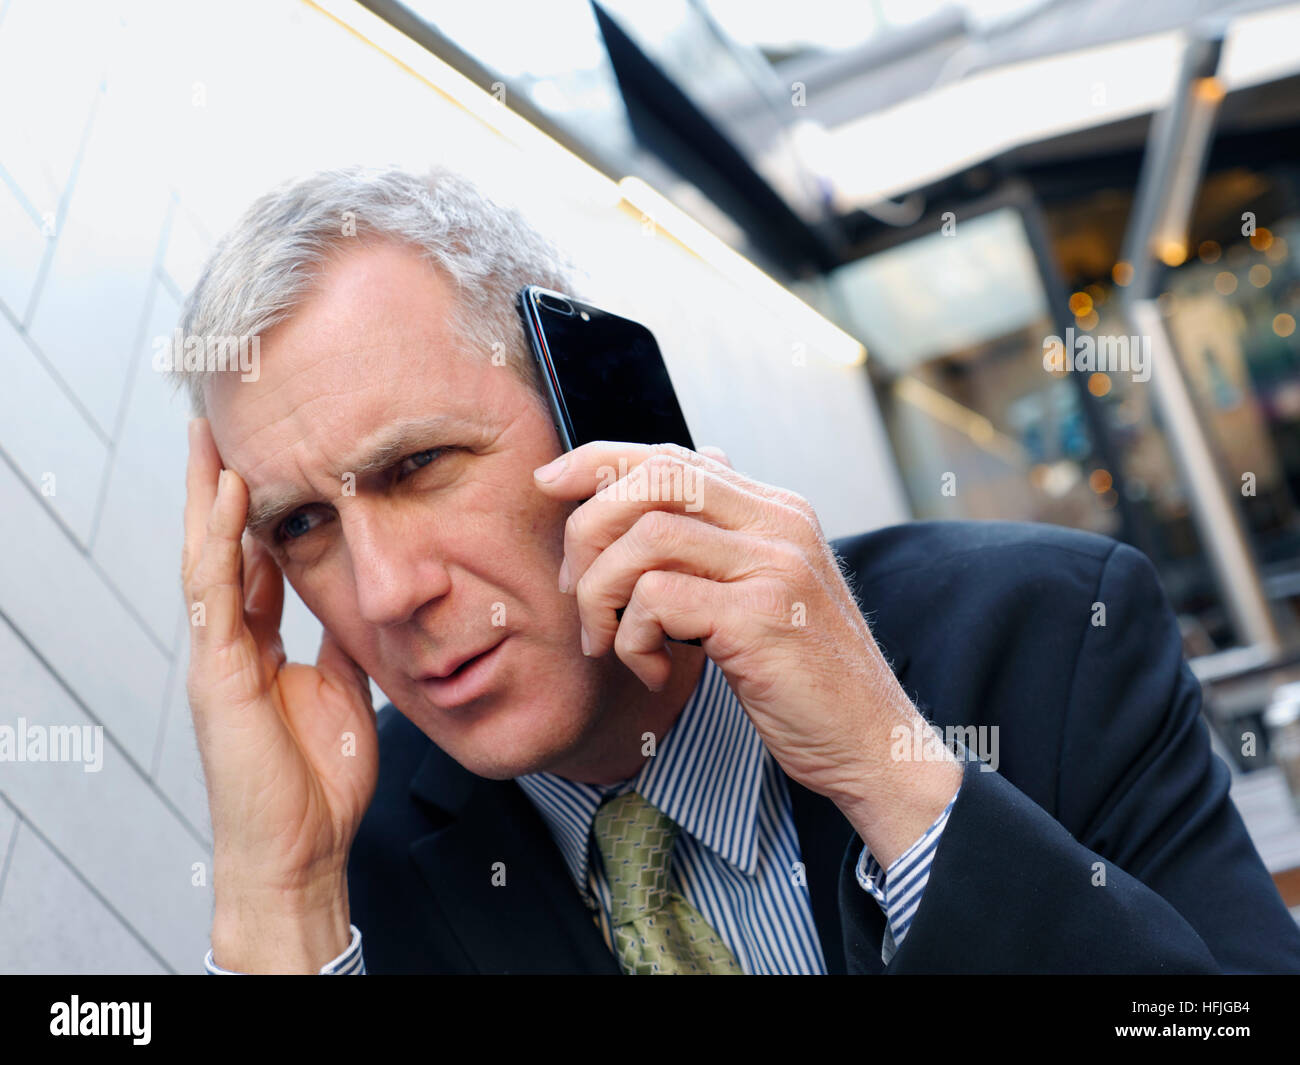 Worried businessman, bad news, looking concerned listening intently on his smartphone iPhone 7 plus mobile telephone at alfresco restaurant bar table Stock Photo